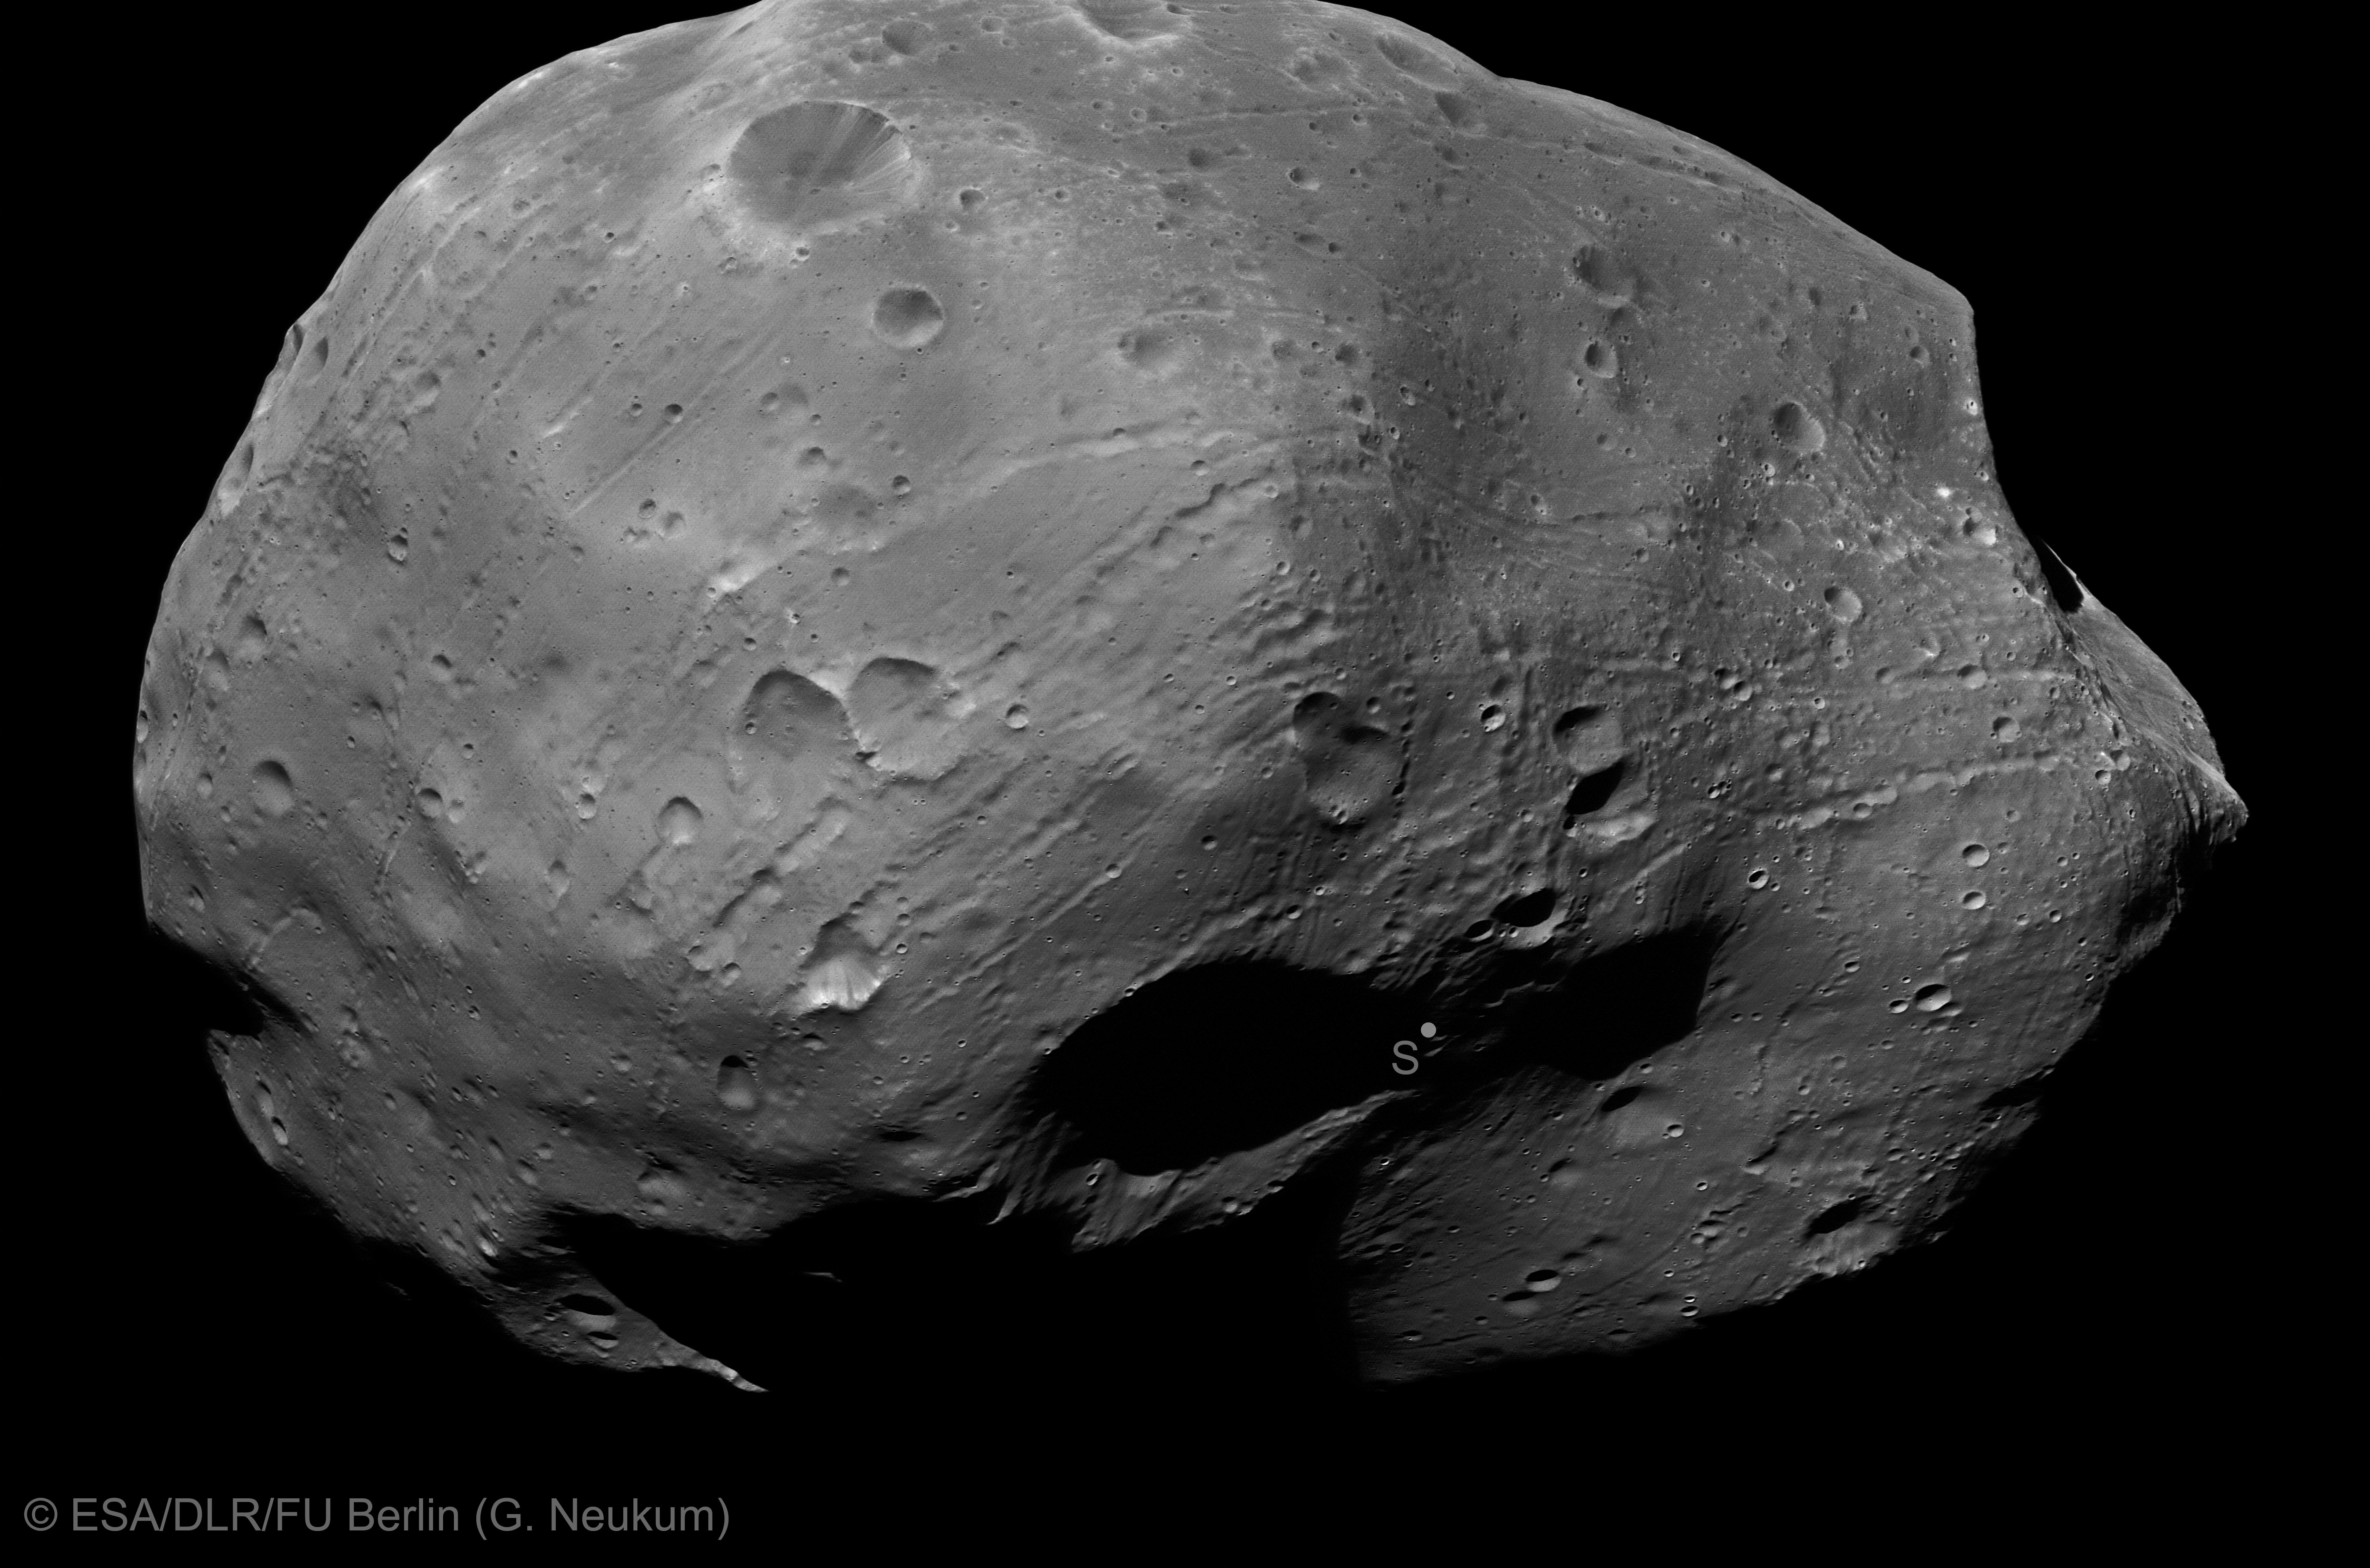 ESA Science & Technology: Mars Express view of Phobos (9 January 2011)7821 x 5176